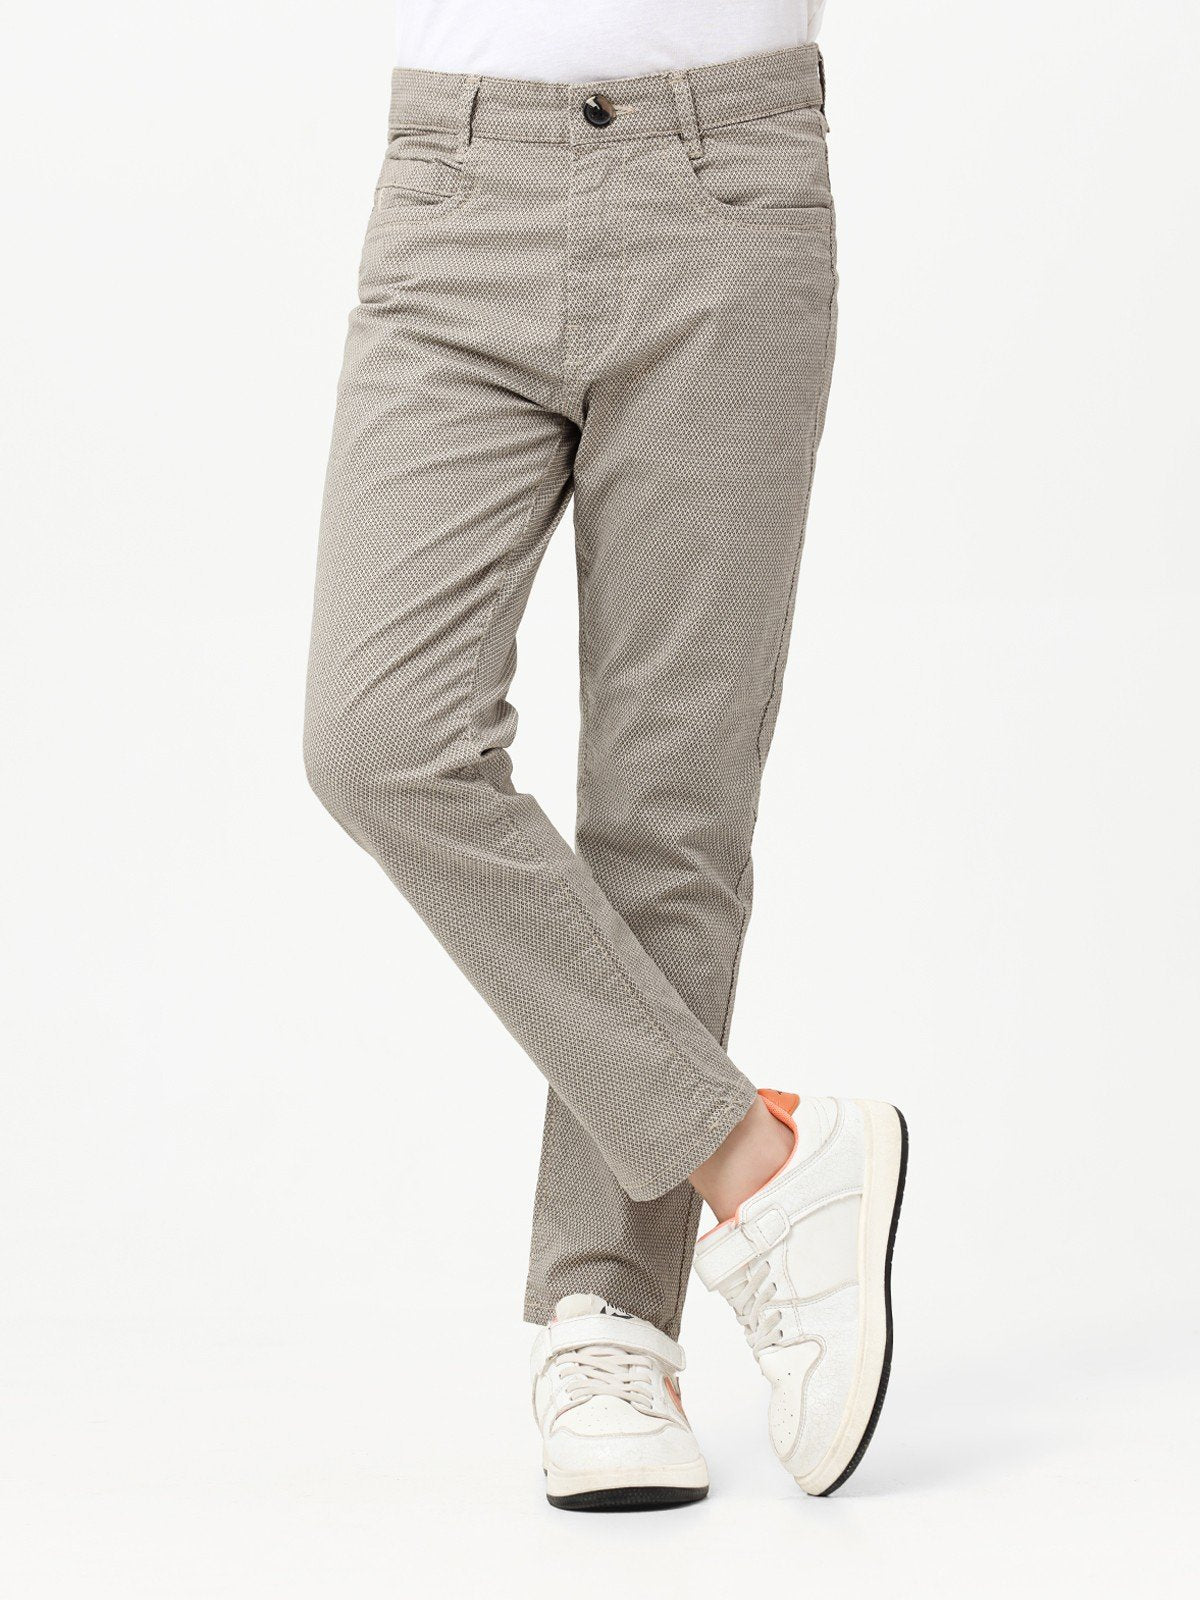 Boy's Fawn Chino Pant - EBBCP23-025